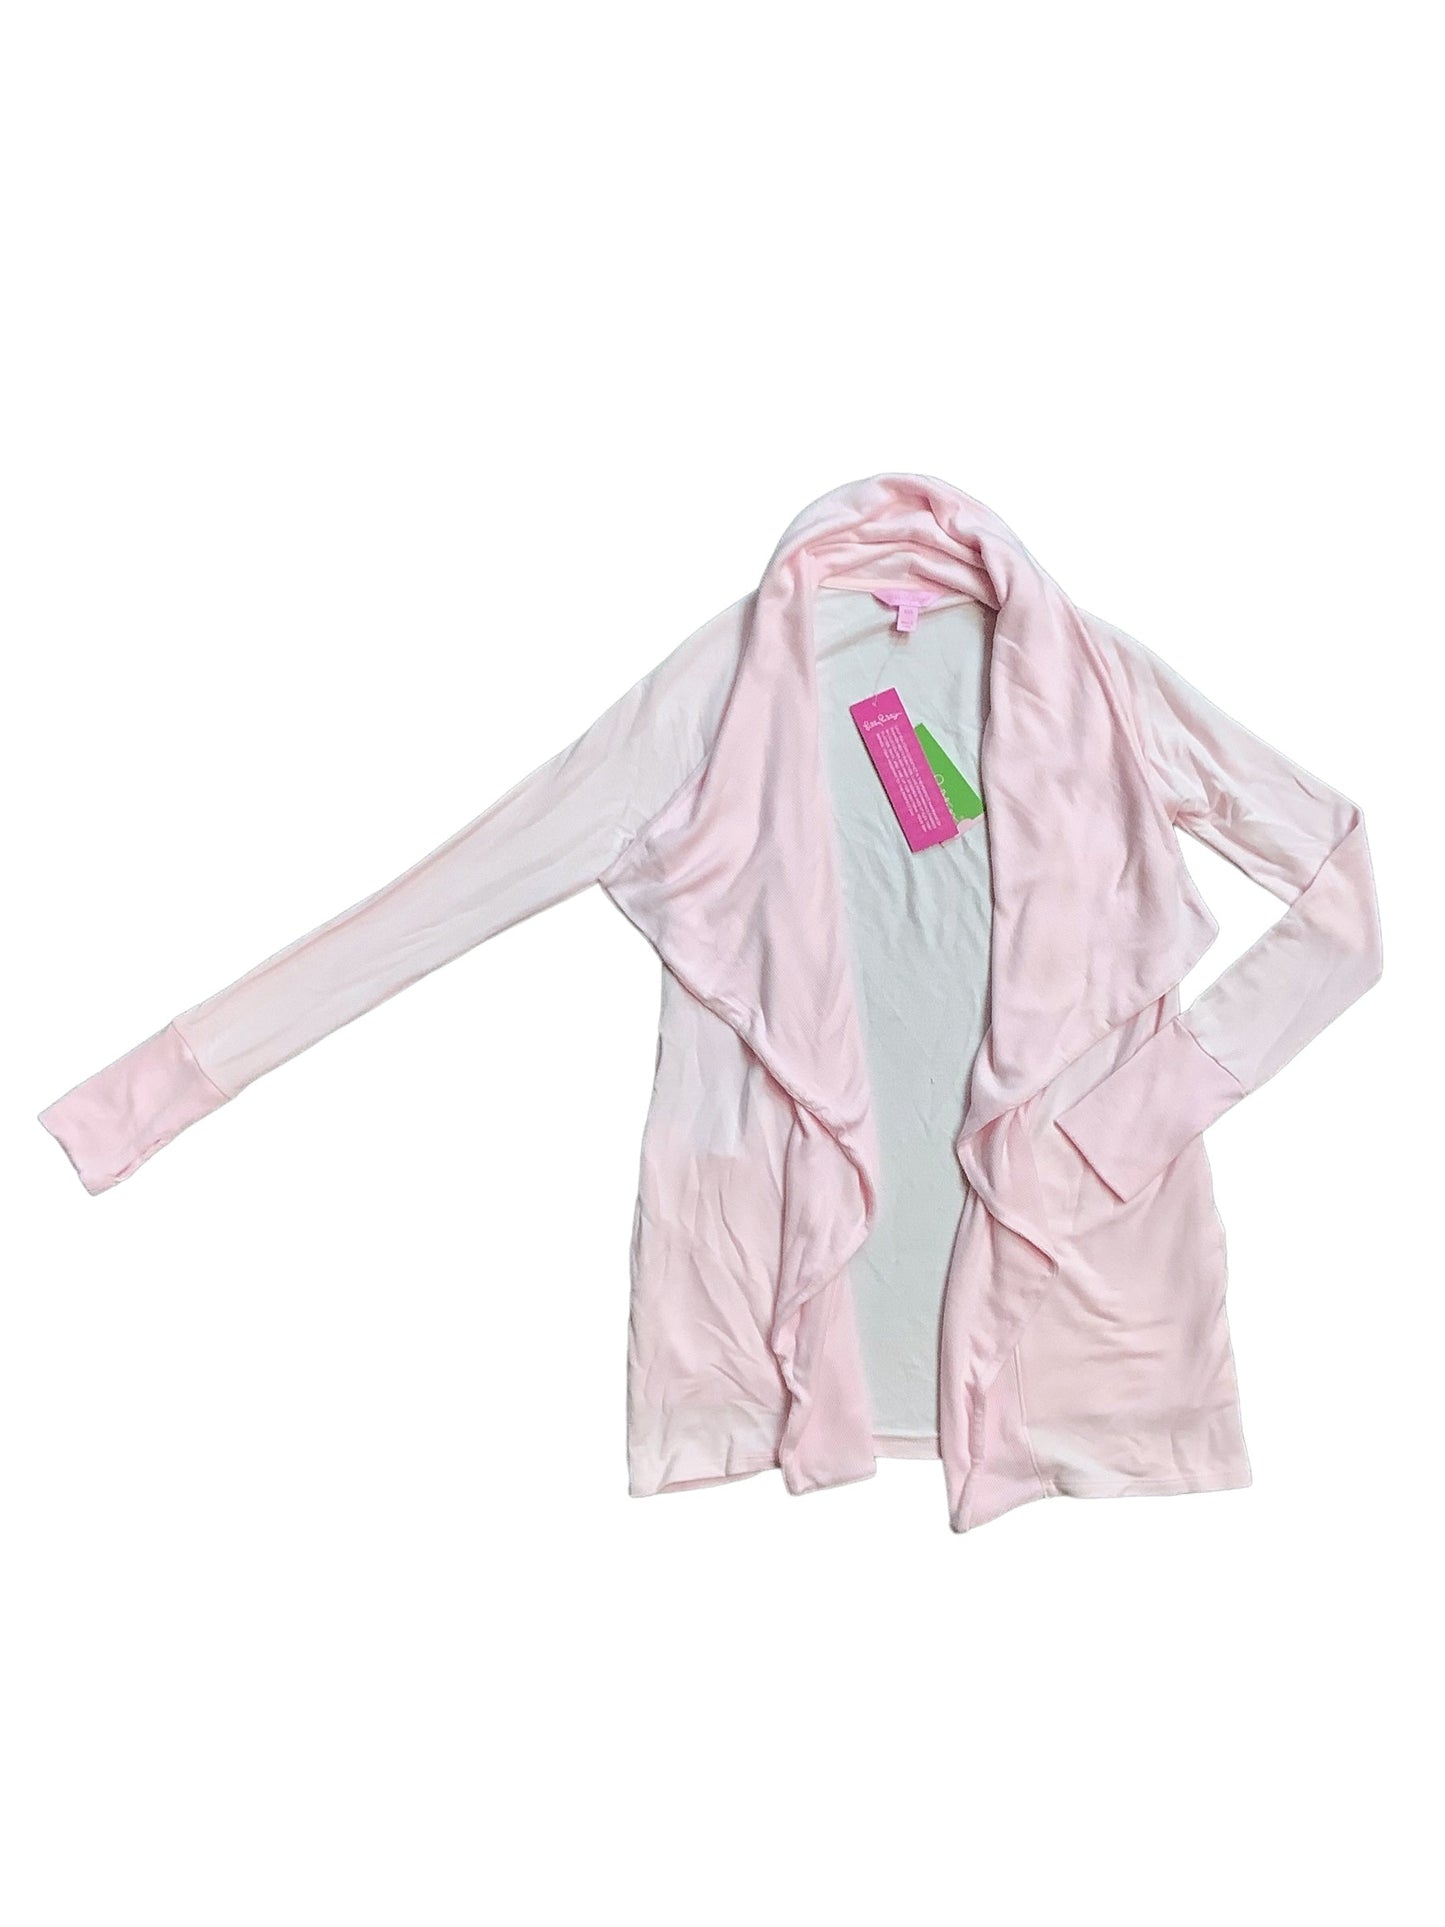 Cardigan By Lilly Pulitzer  Size: Xs